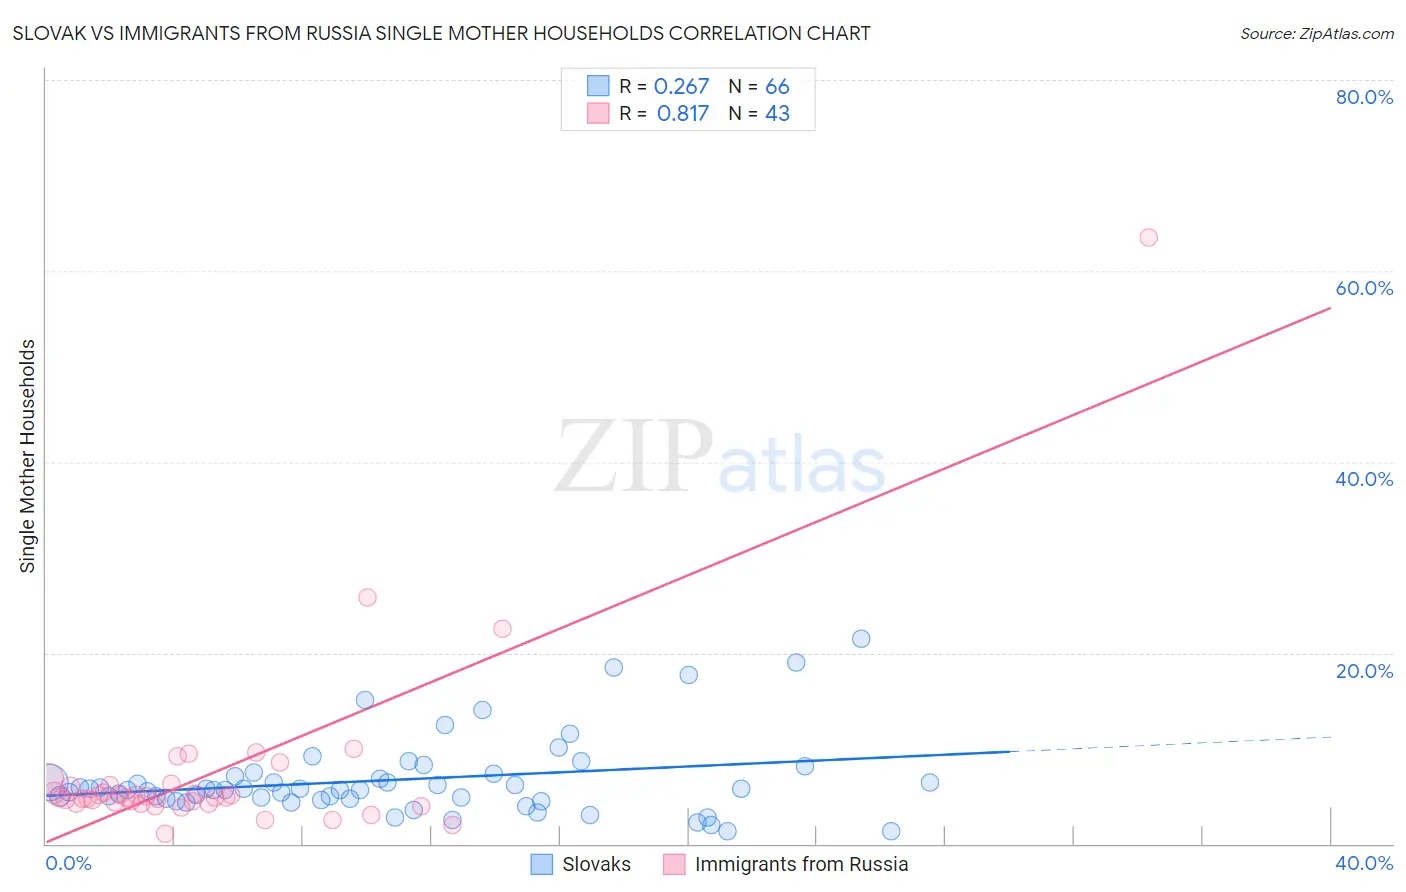 Slovak vs Immigrants from Russia Single Mother Households